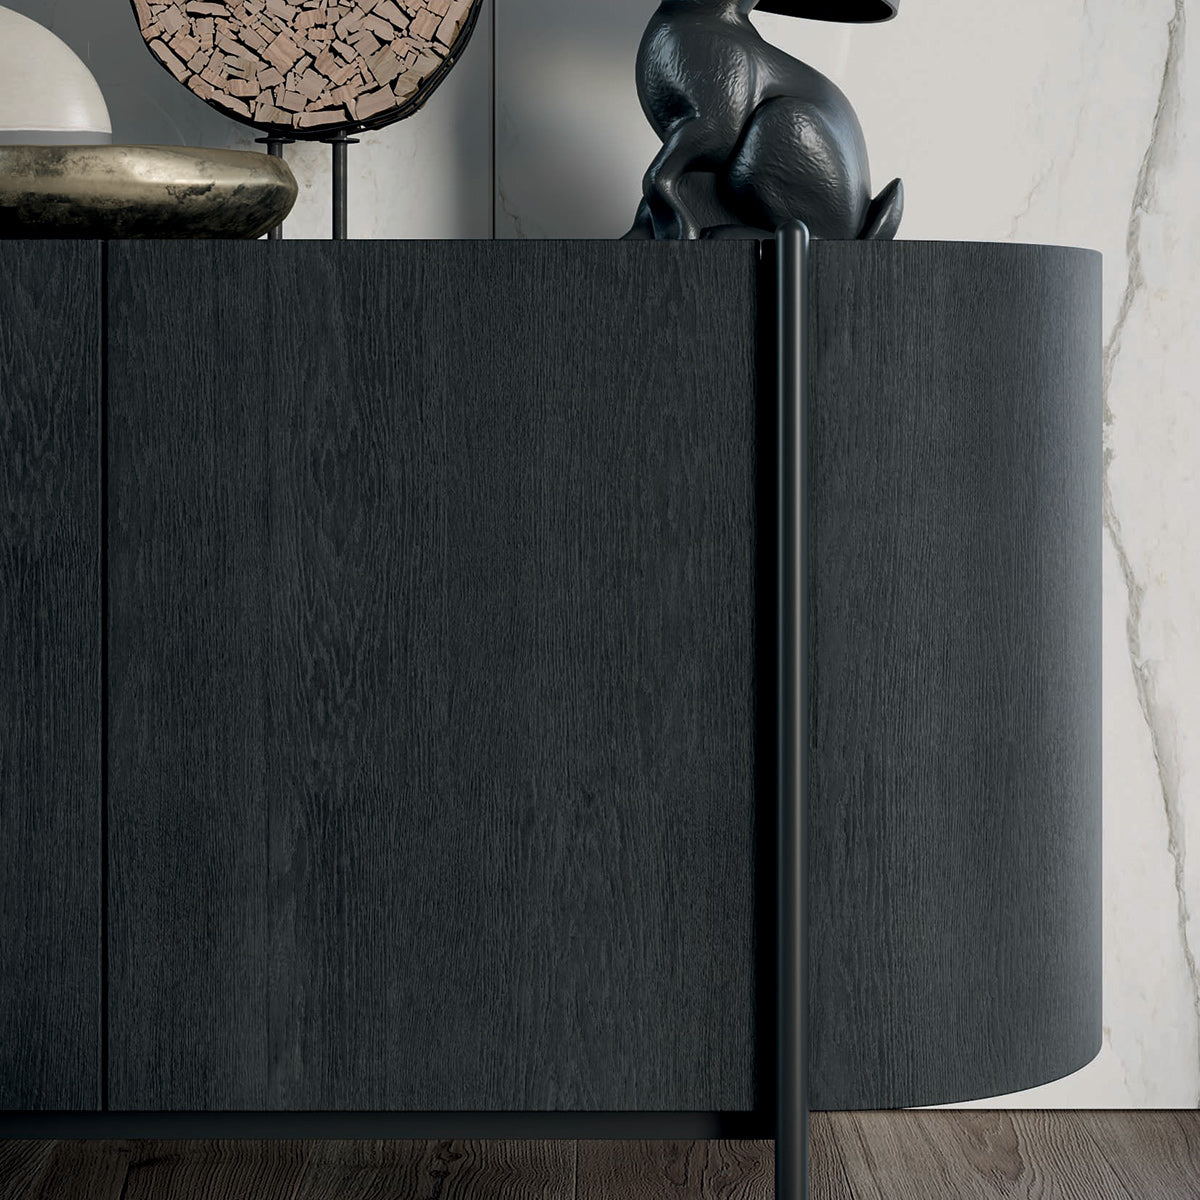 Supernova Sideboard by Dall'Agnese